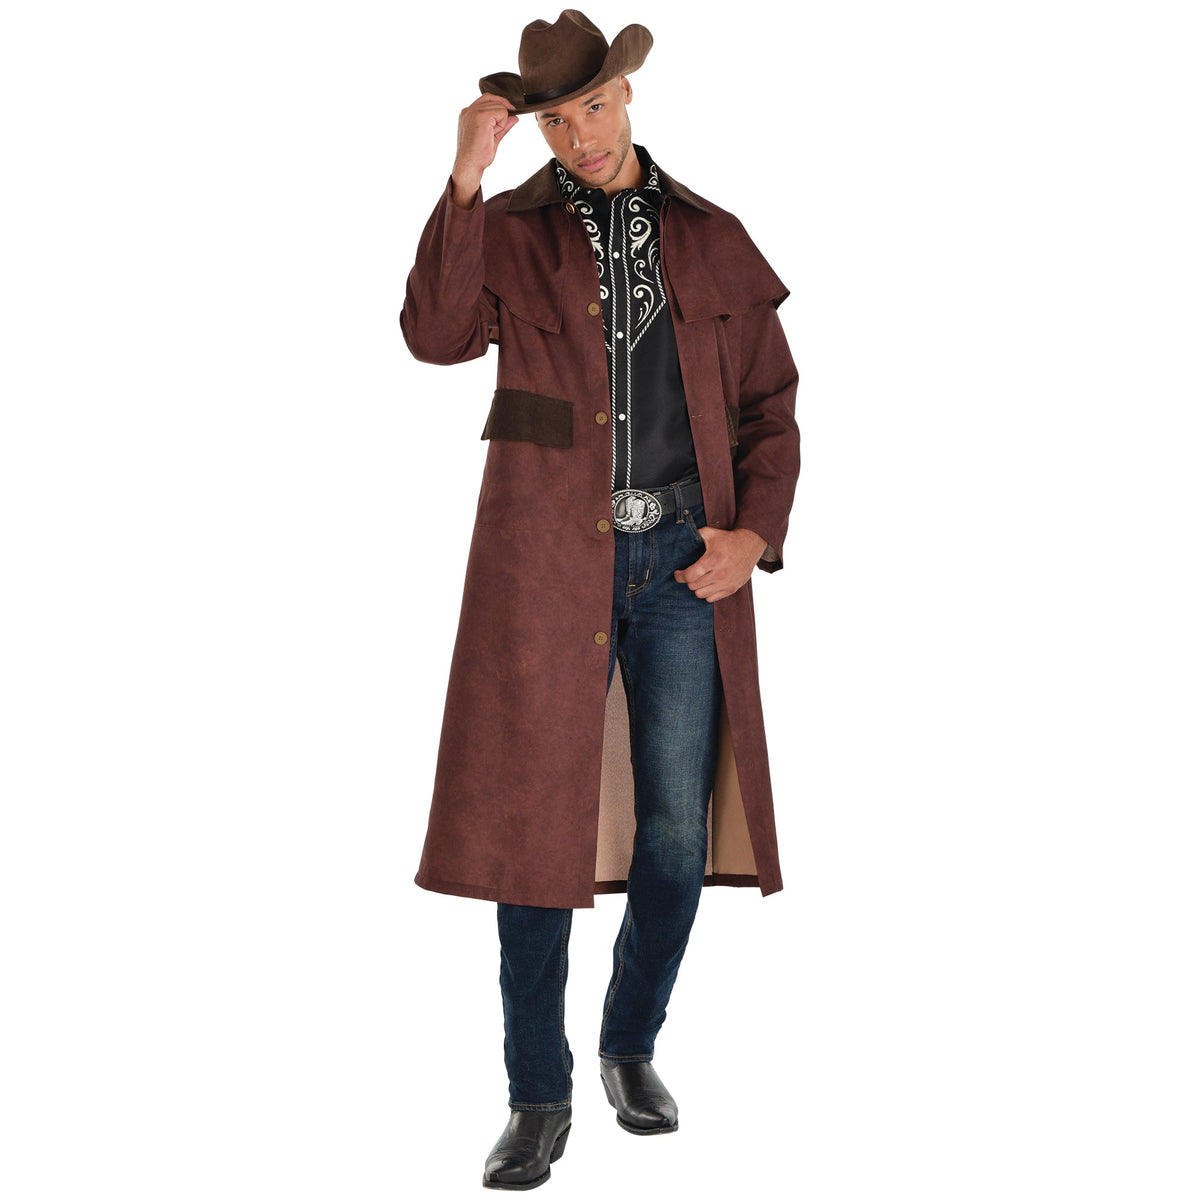 HALLOWEEN COSTUME CO. Costume Accessories Brown Modern Western Duster Coat for Adults 192937452349